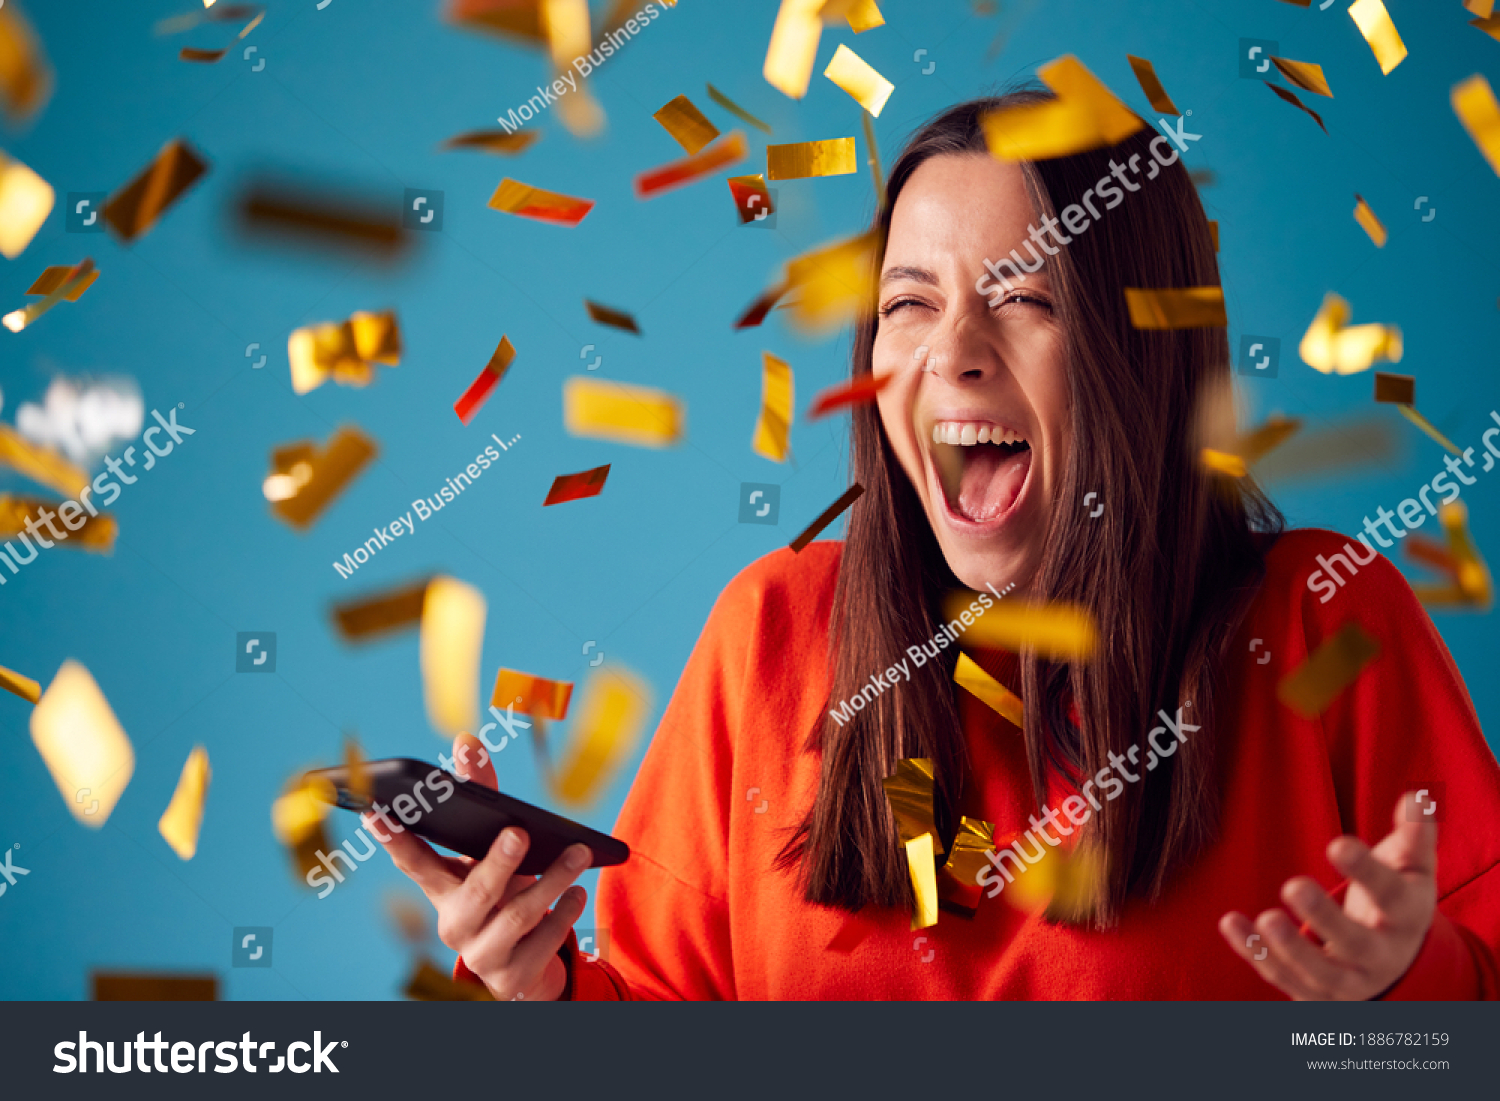 Celebrating Young Woman With Mobile Phone Winning Prize And Showered With Gold Confetti In Studio #1886782159